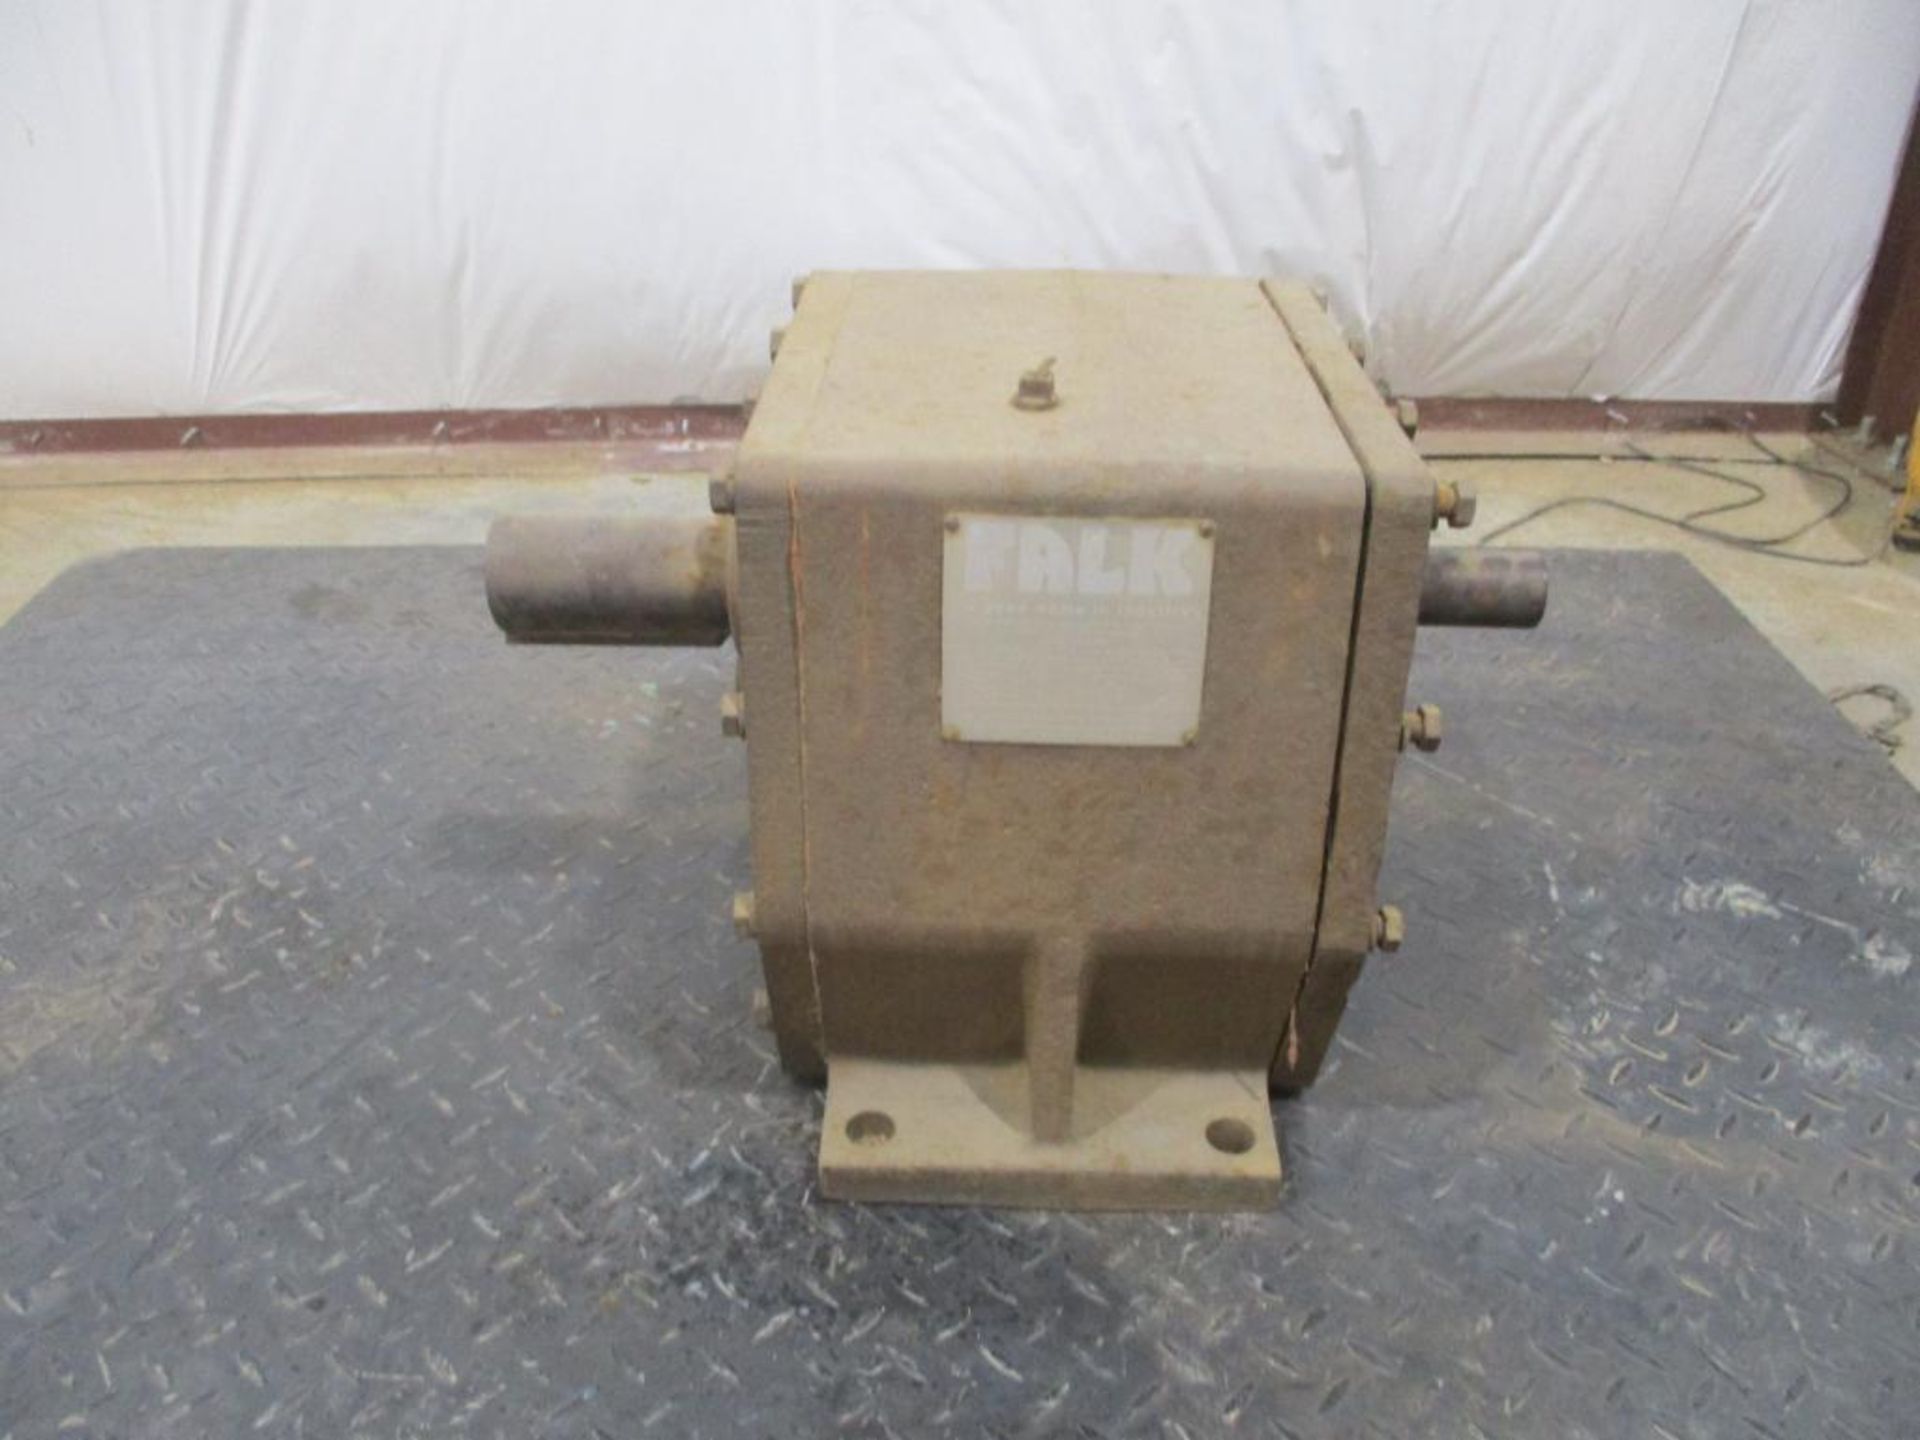 FALK 30.69 RATIO REDUCER P/N 1050F2A, 297# lbs (There will be a $40 Rigging/Prep fee added to the in